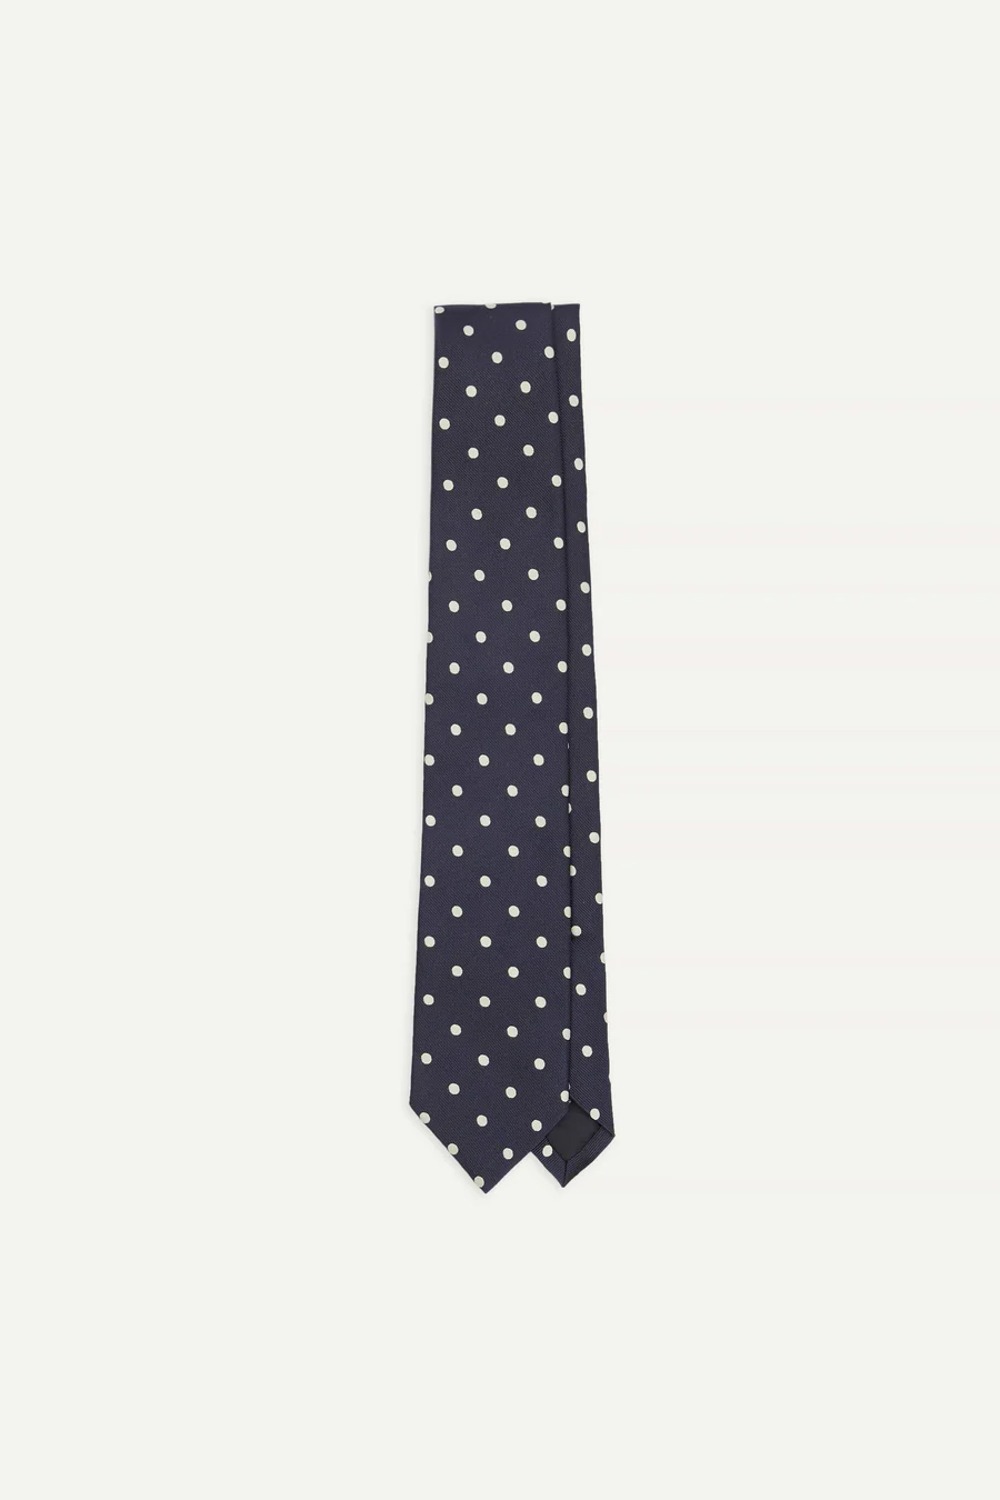 (23SS) POLKA DOT EMBROIDERED TIE NAVY &amp; WHITE